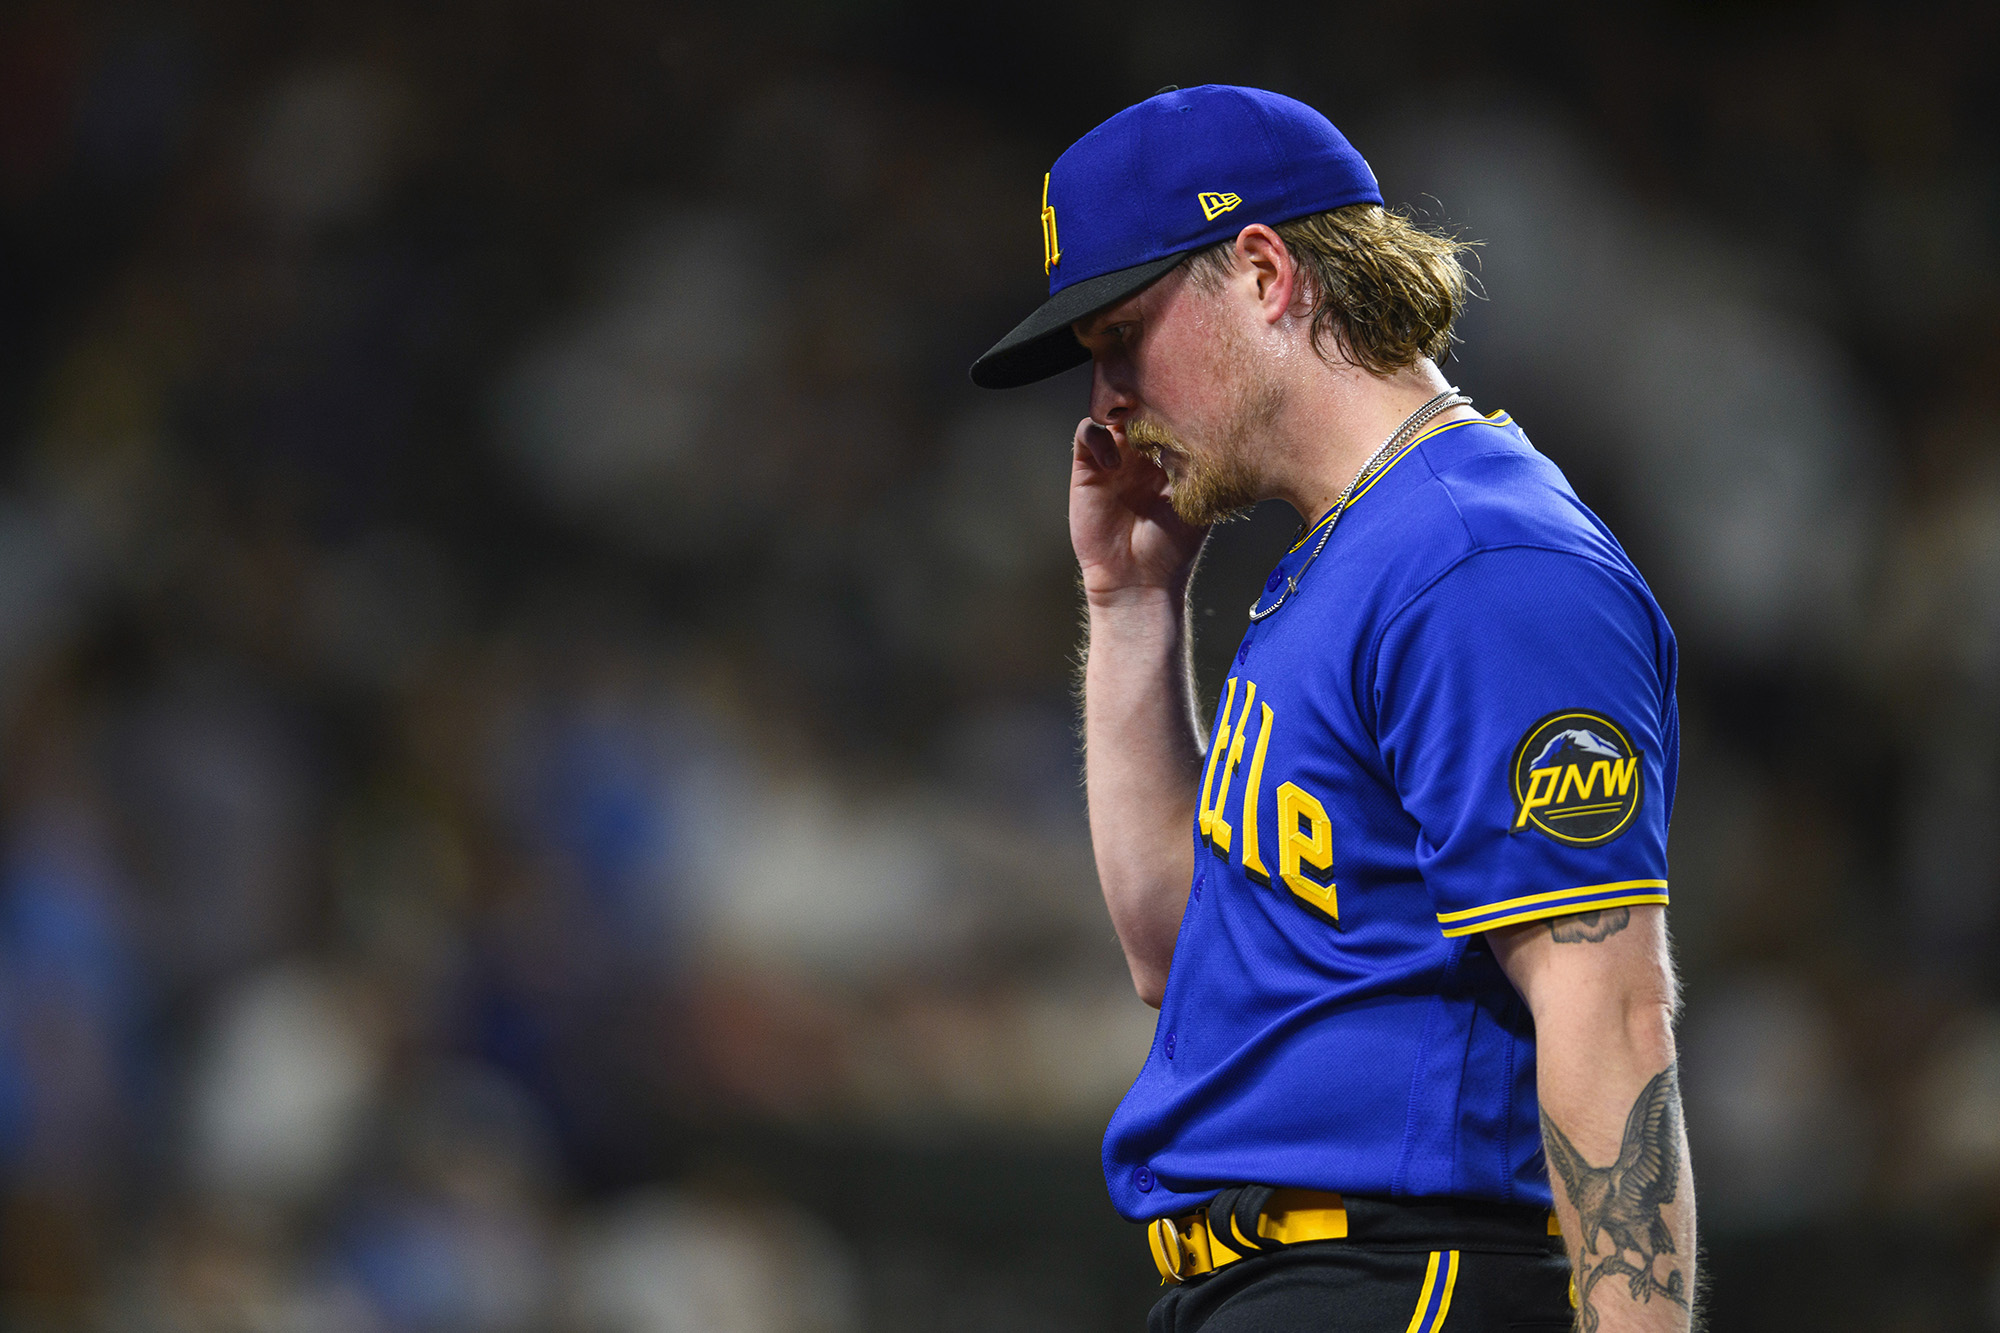 Seattle Mariners relief pitcher Gabe Speier is pulled during the eighth inning after giving up six runs to the Tampa Bay Rays in a baseball game Friday, June 30, 2023, in Seattle.